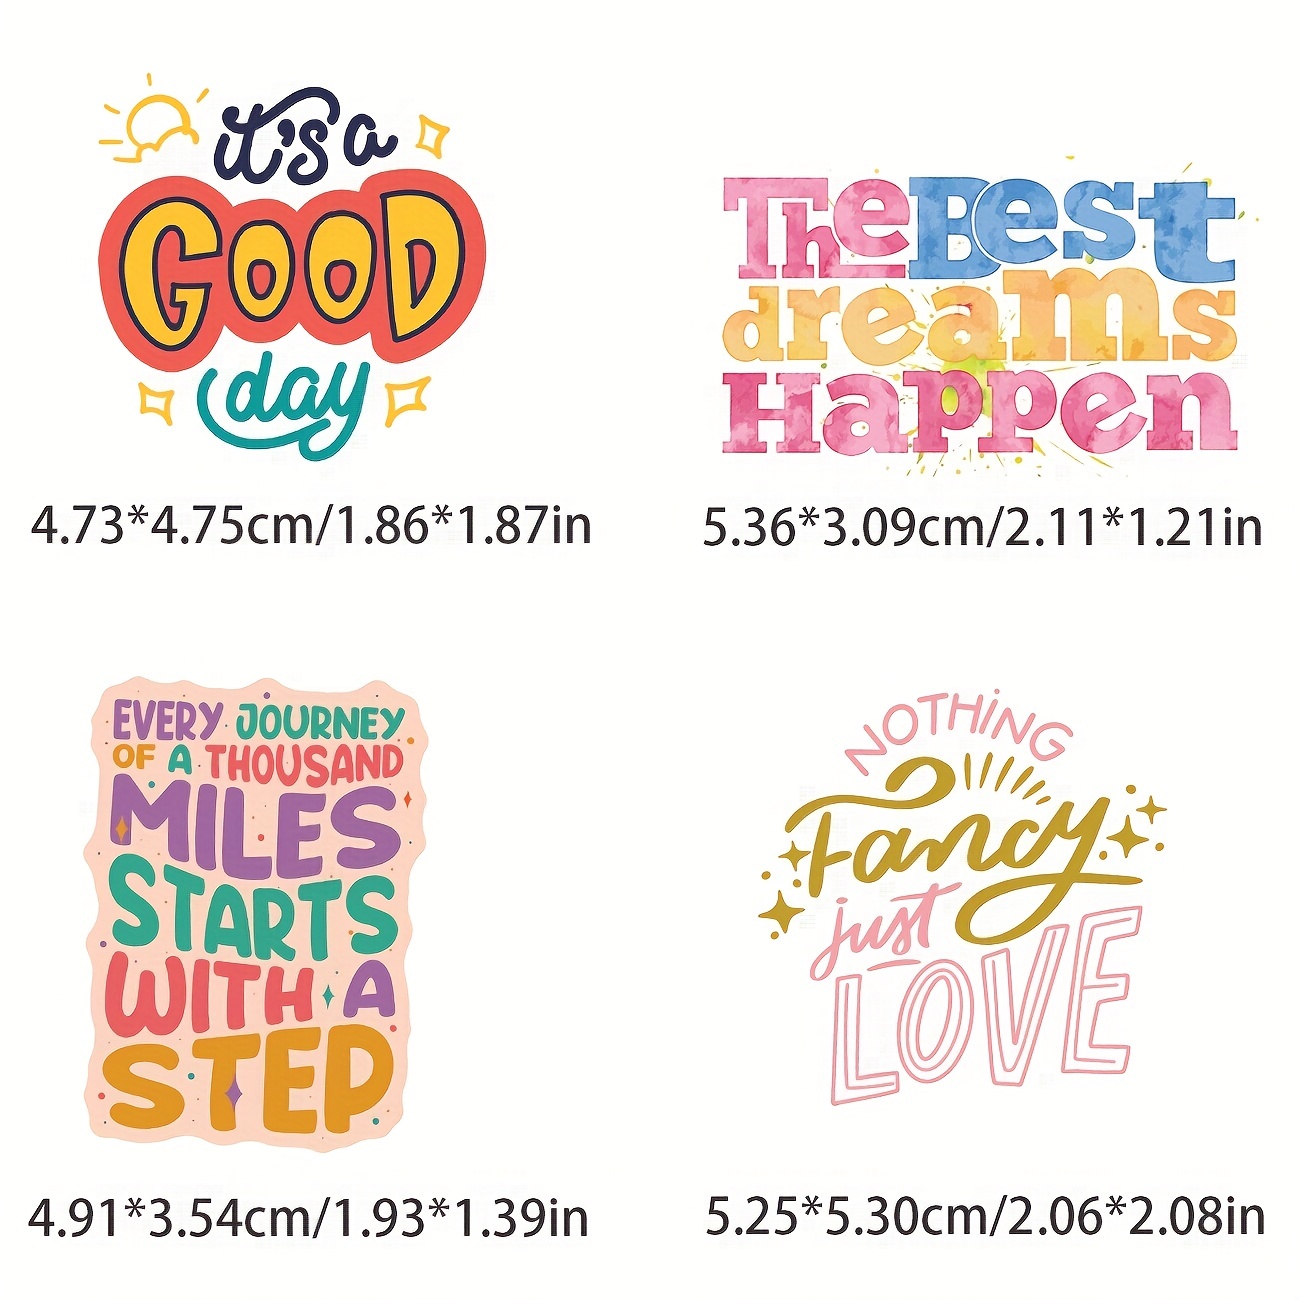 Inspirational Stickers Pack Motivational Stickers for Water Bottle Adults  Women